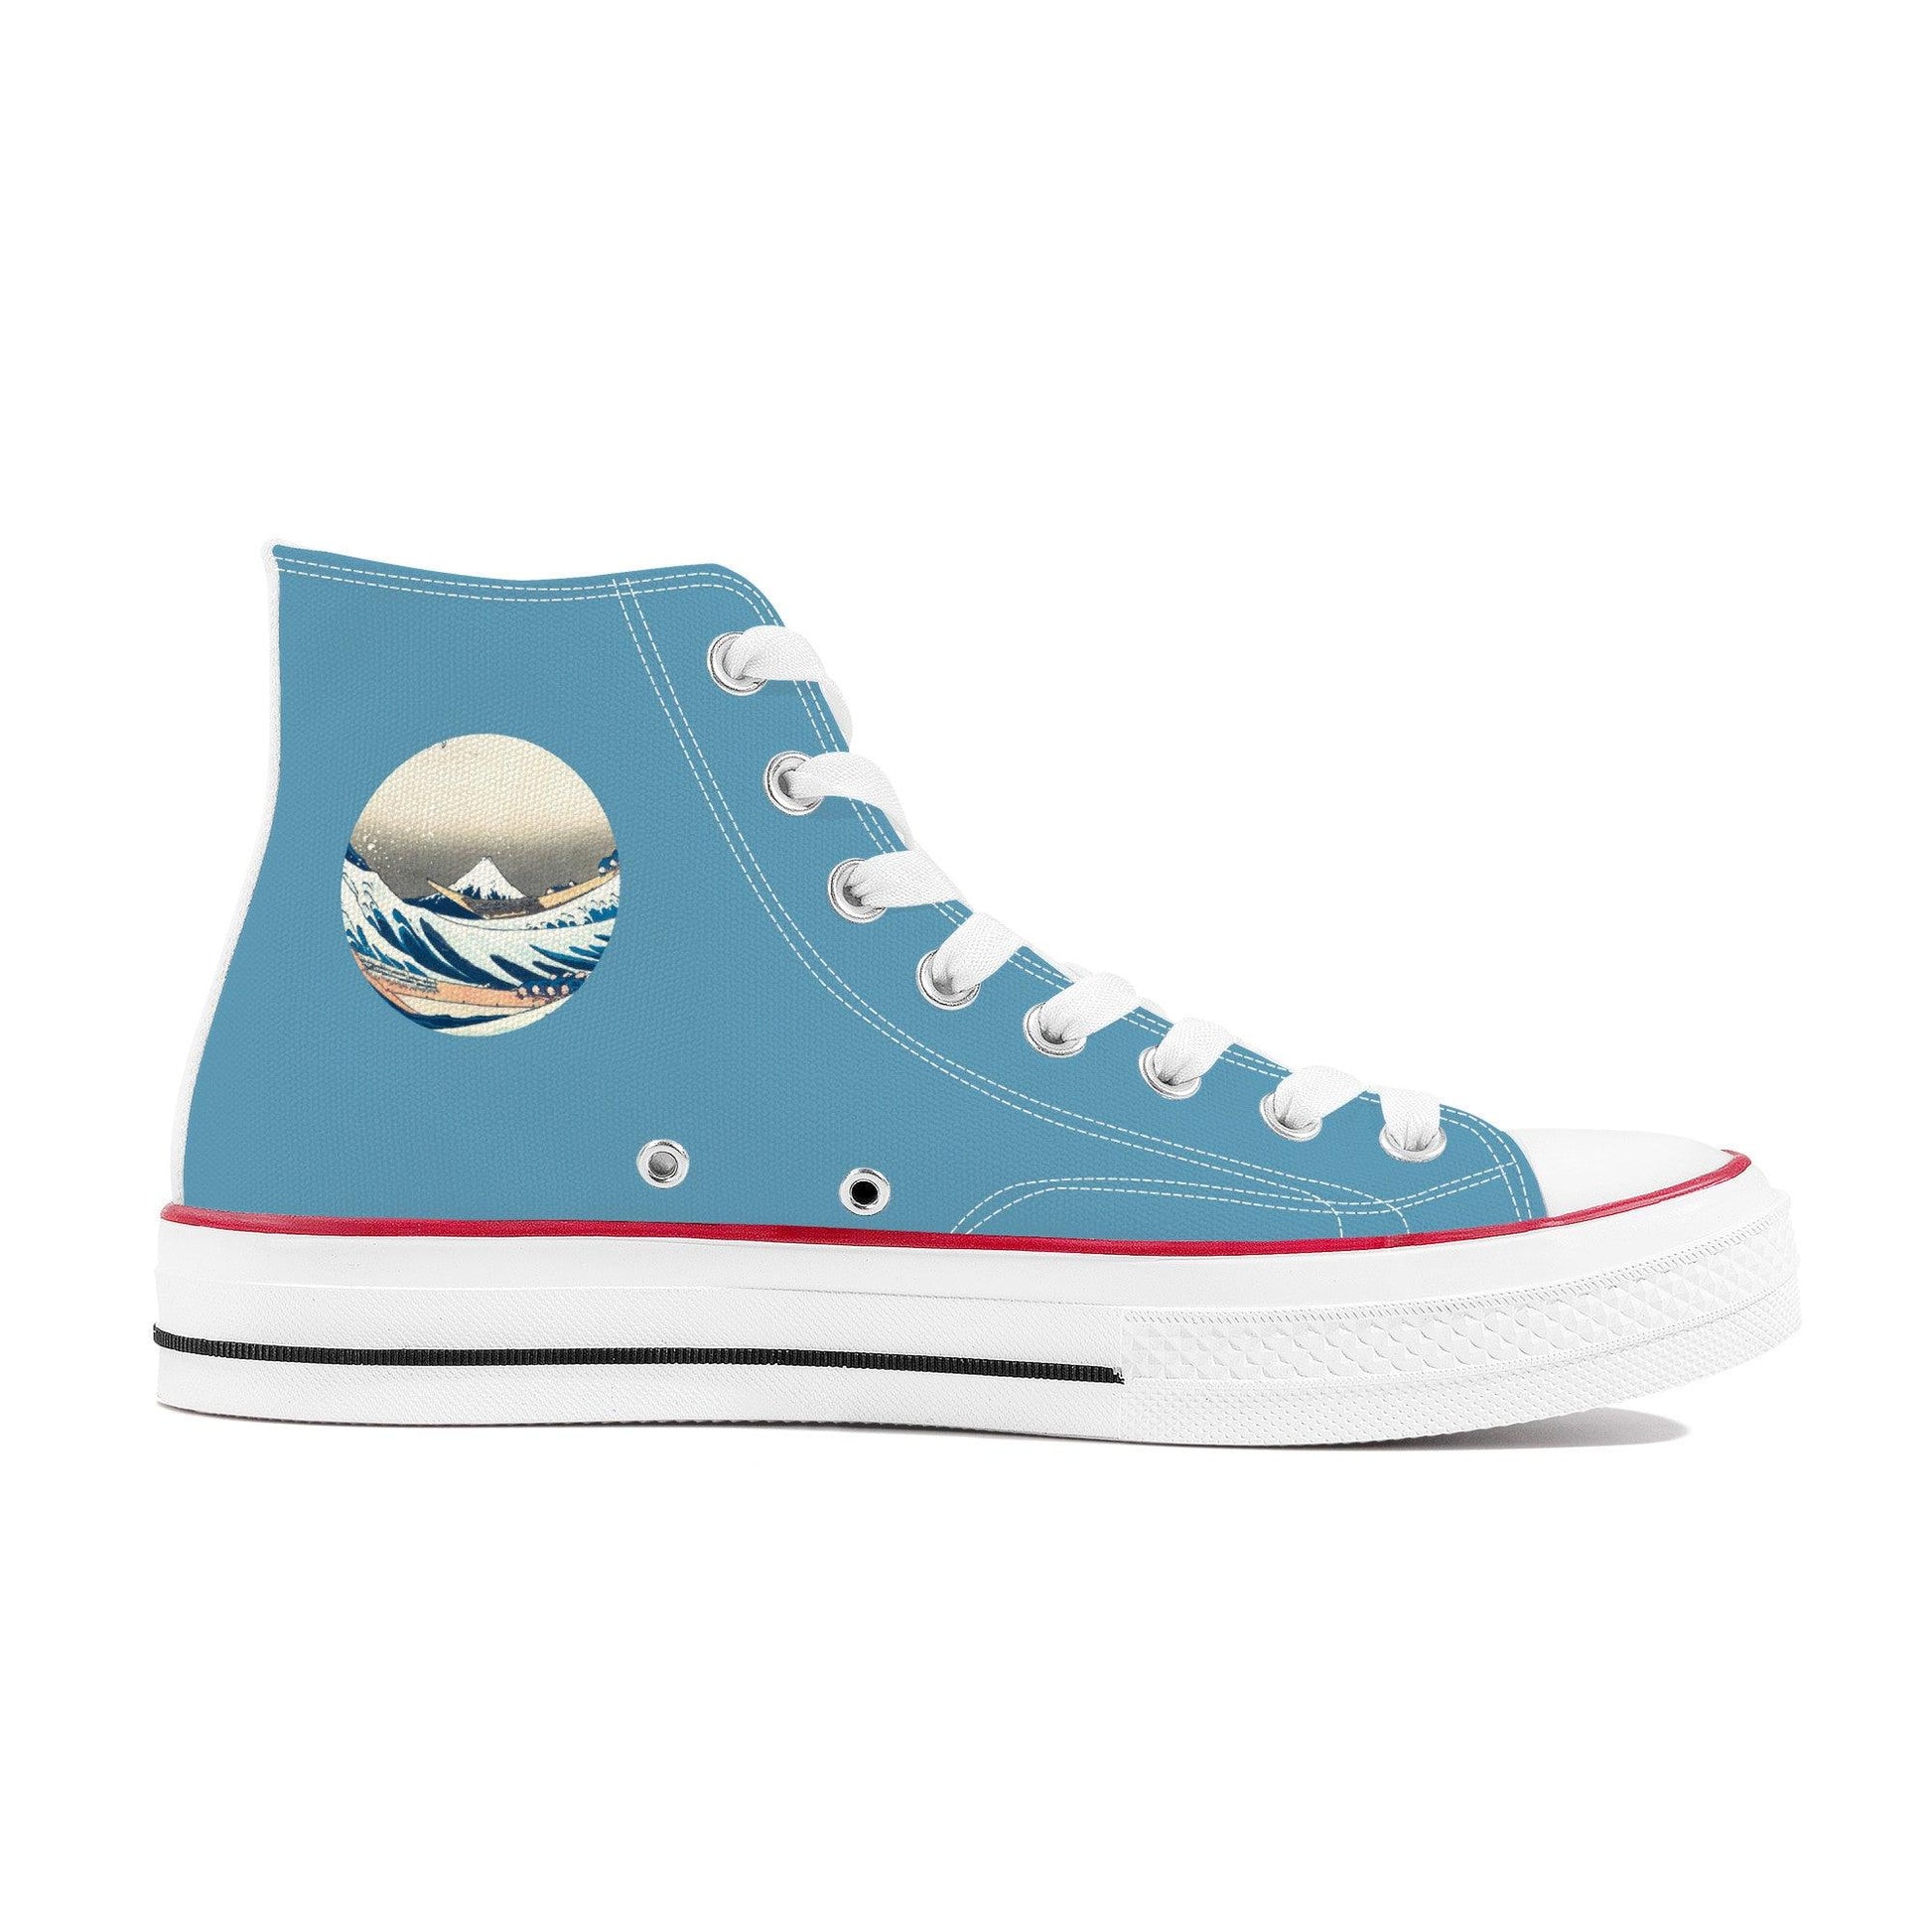 The Great Wave High Top Blue Canvas Shoes - Kaito Japan Design 